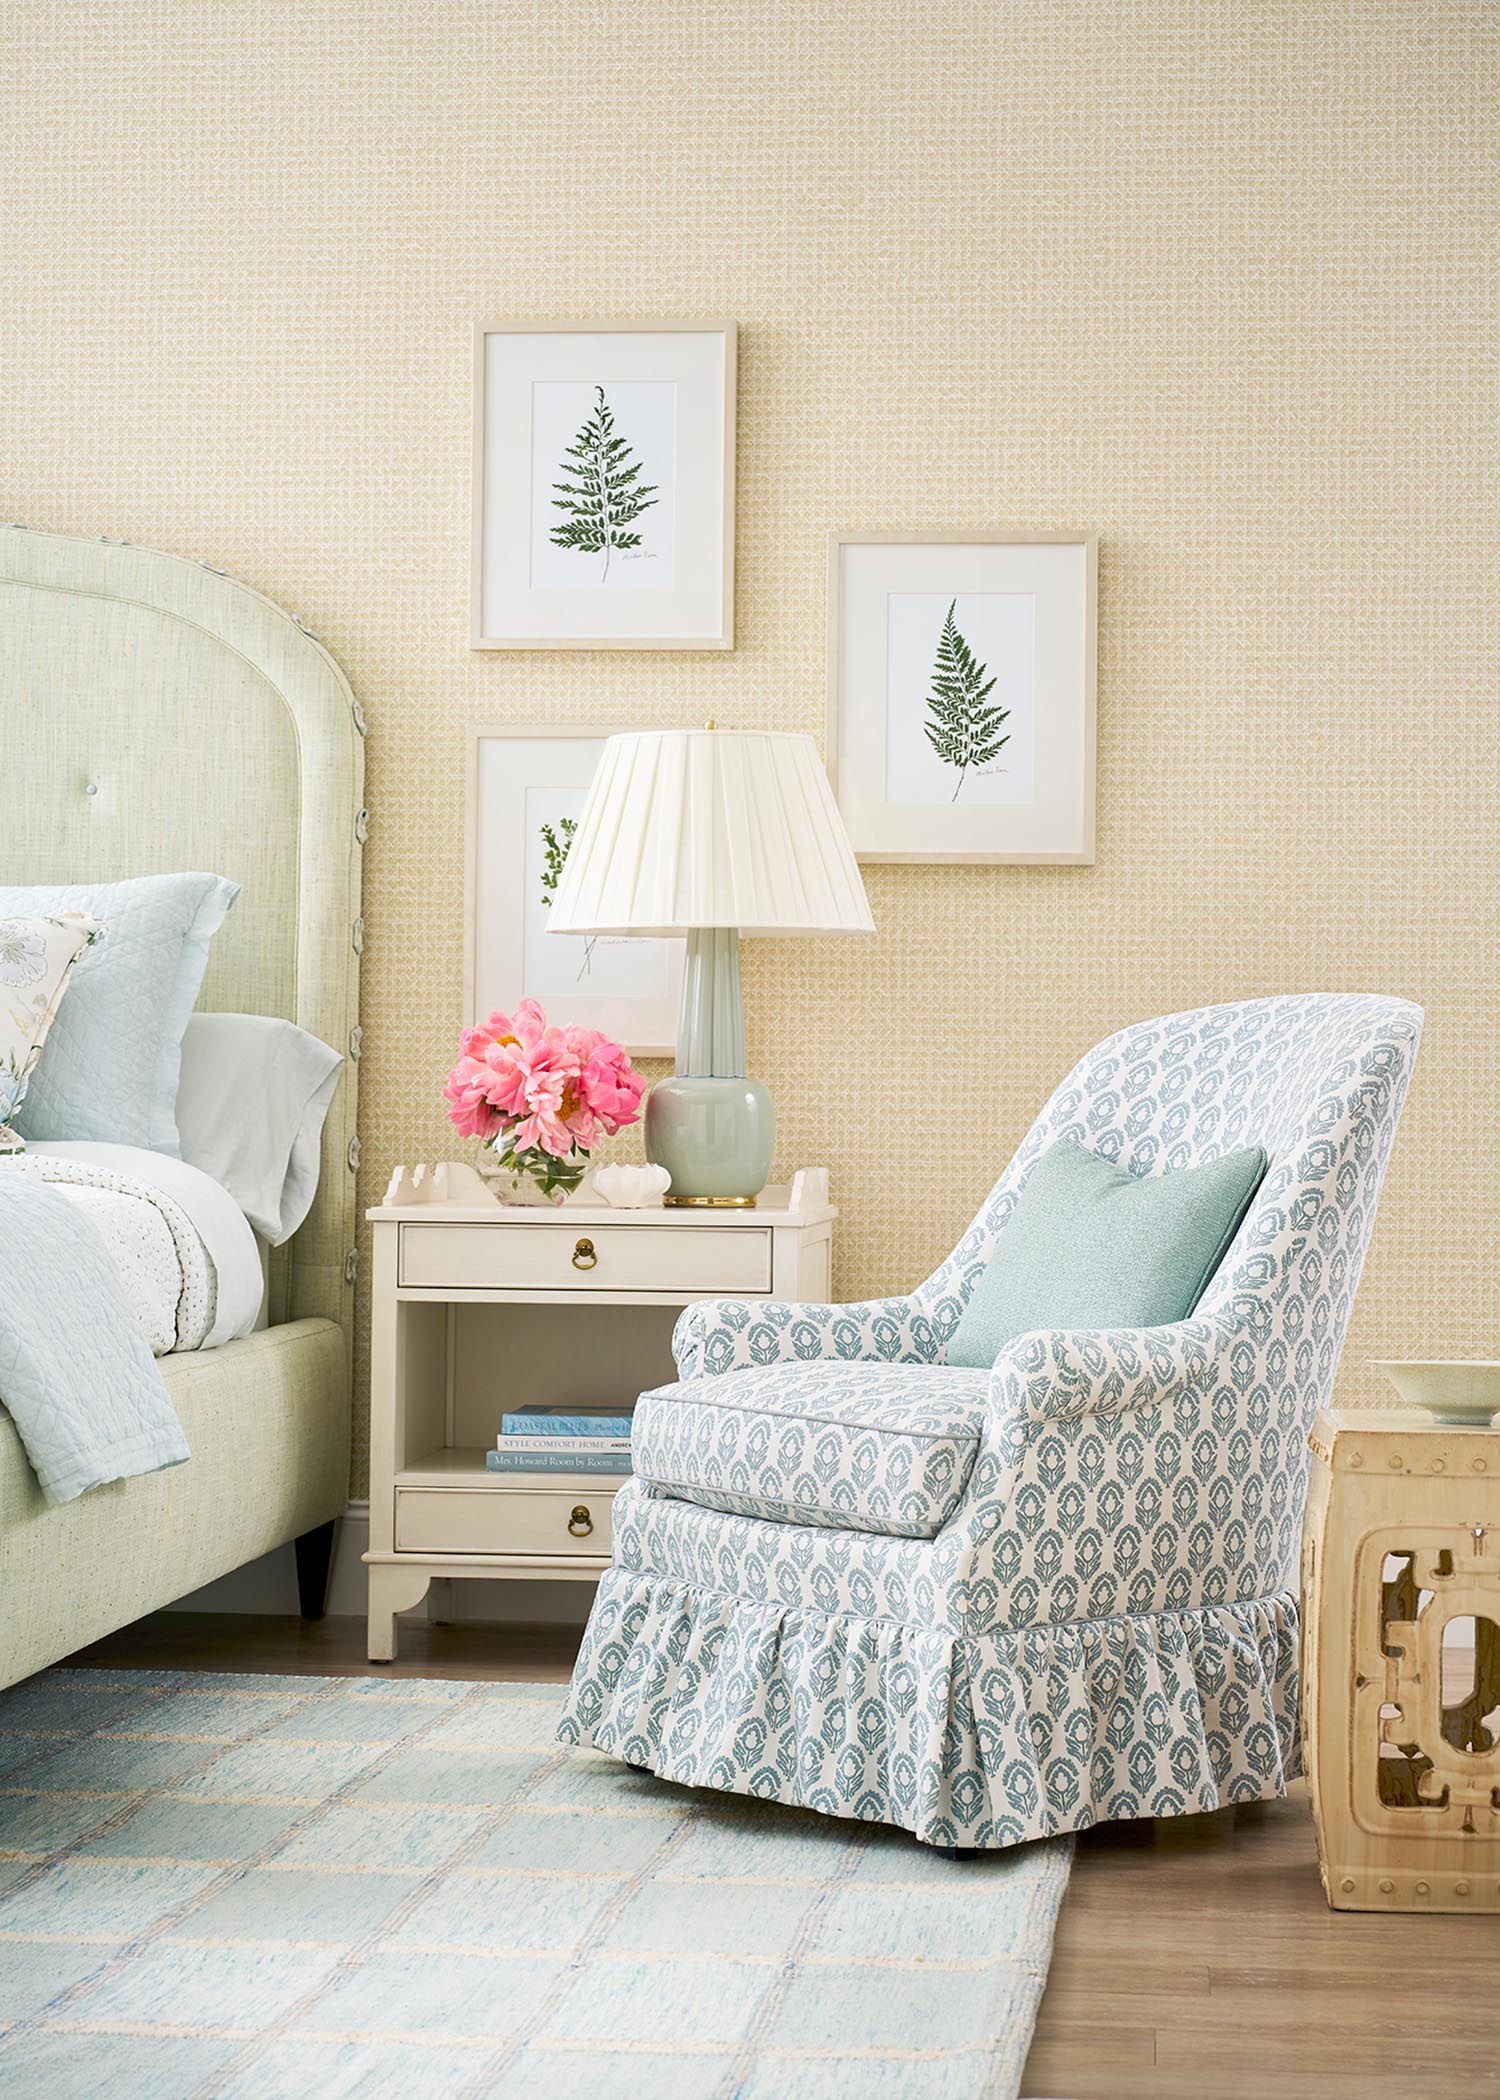 A pastel blue ruffled chair sits in a bedroom.